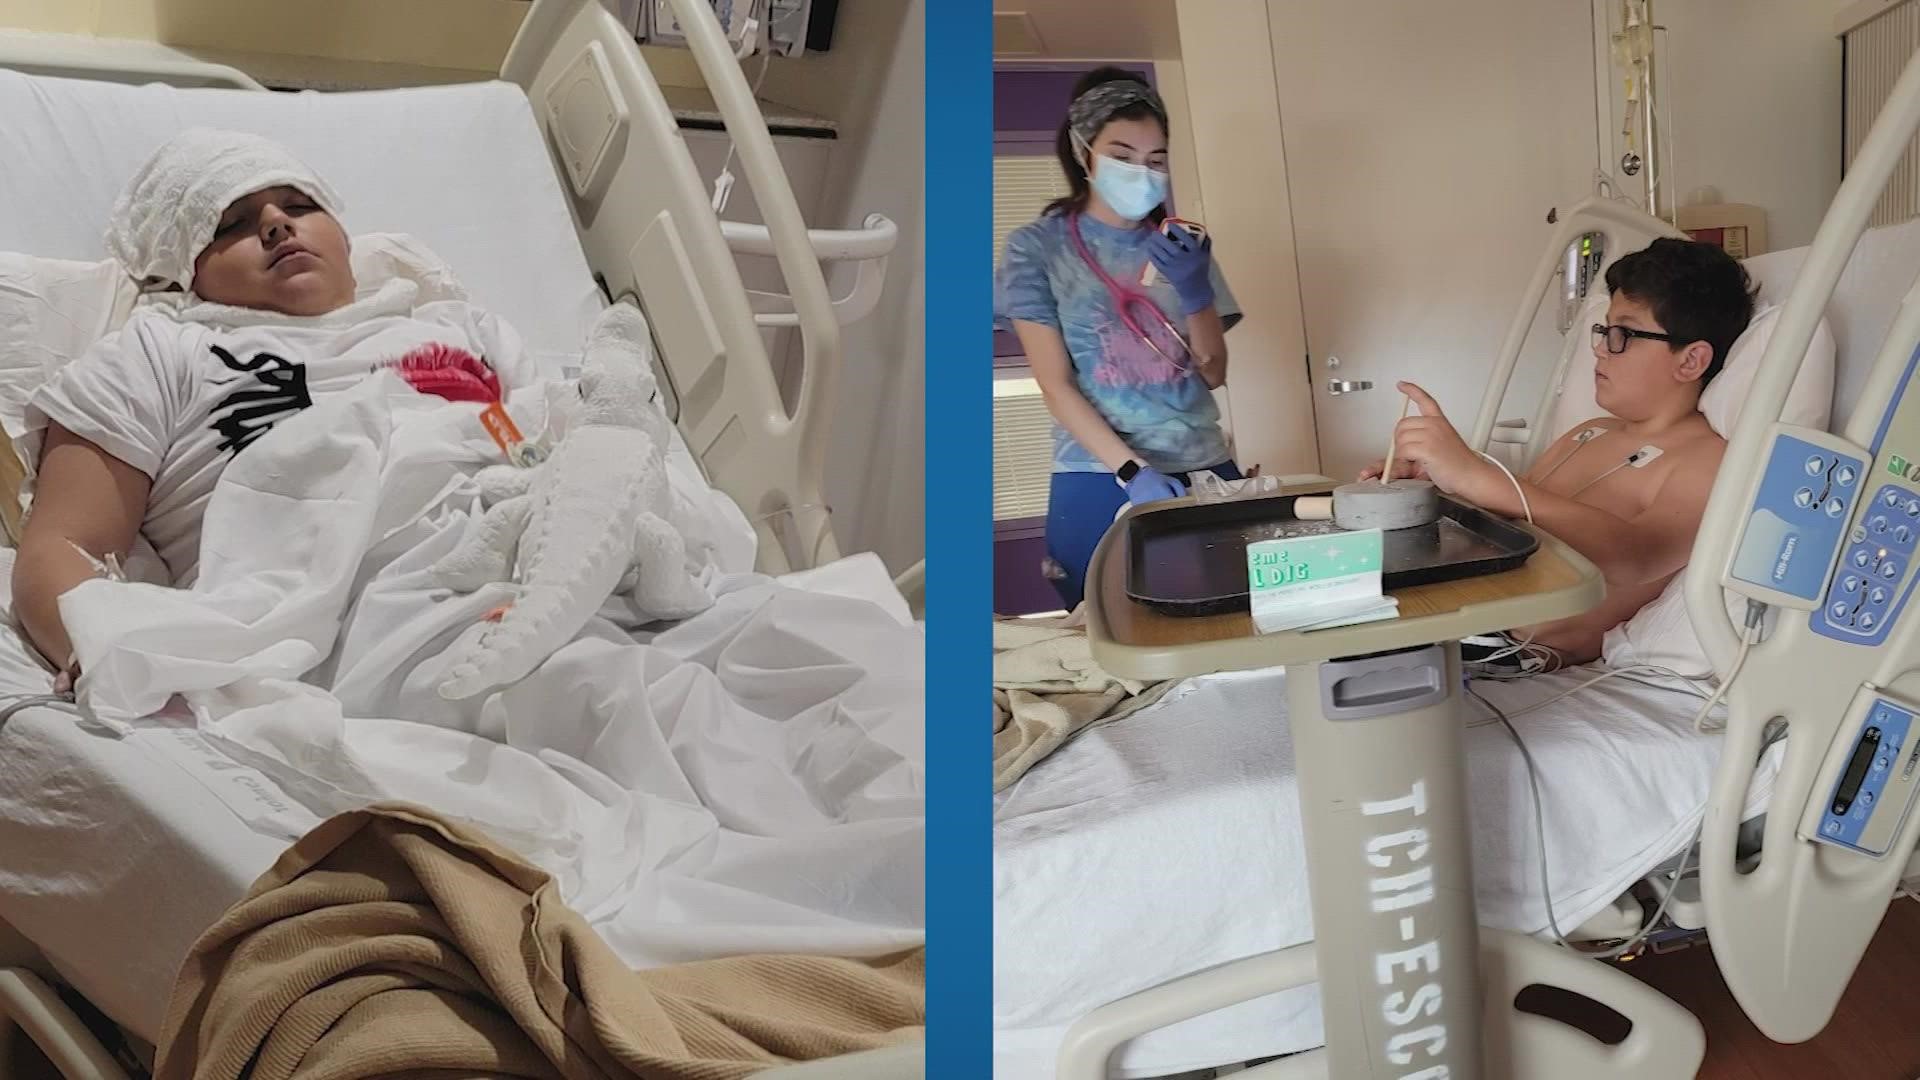 The Houston mother said her 9-year-old son was diagnosed with MIS-C in January. Two months later, her 11-year-old son was hospitalized with the same symptoms.